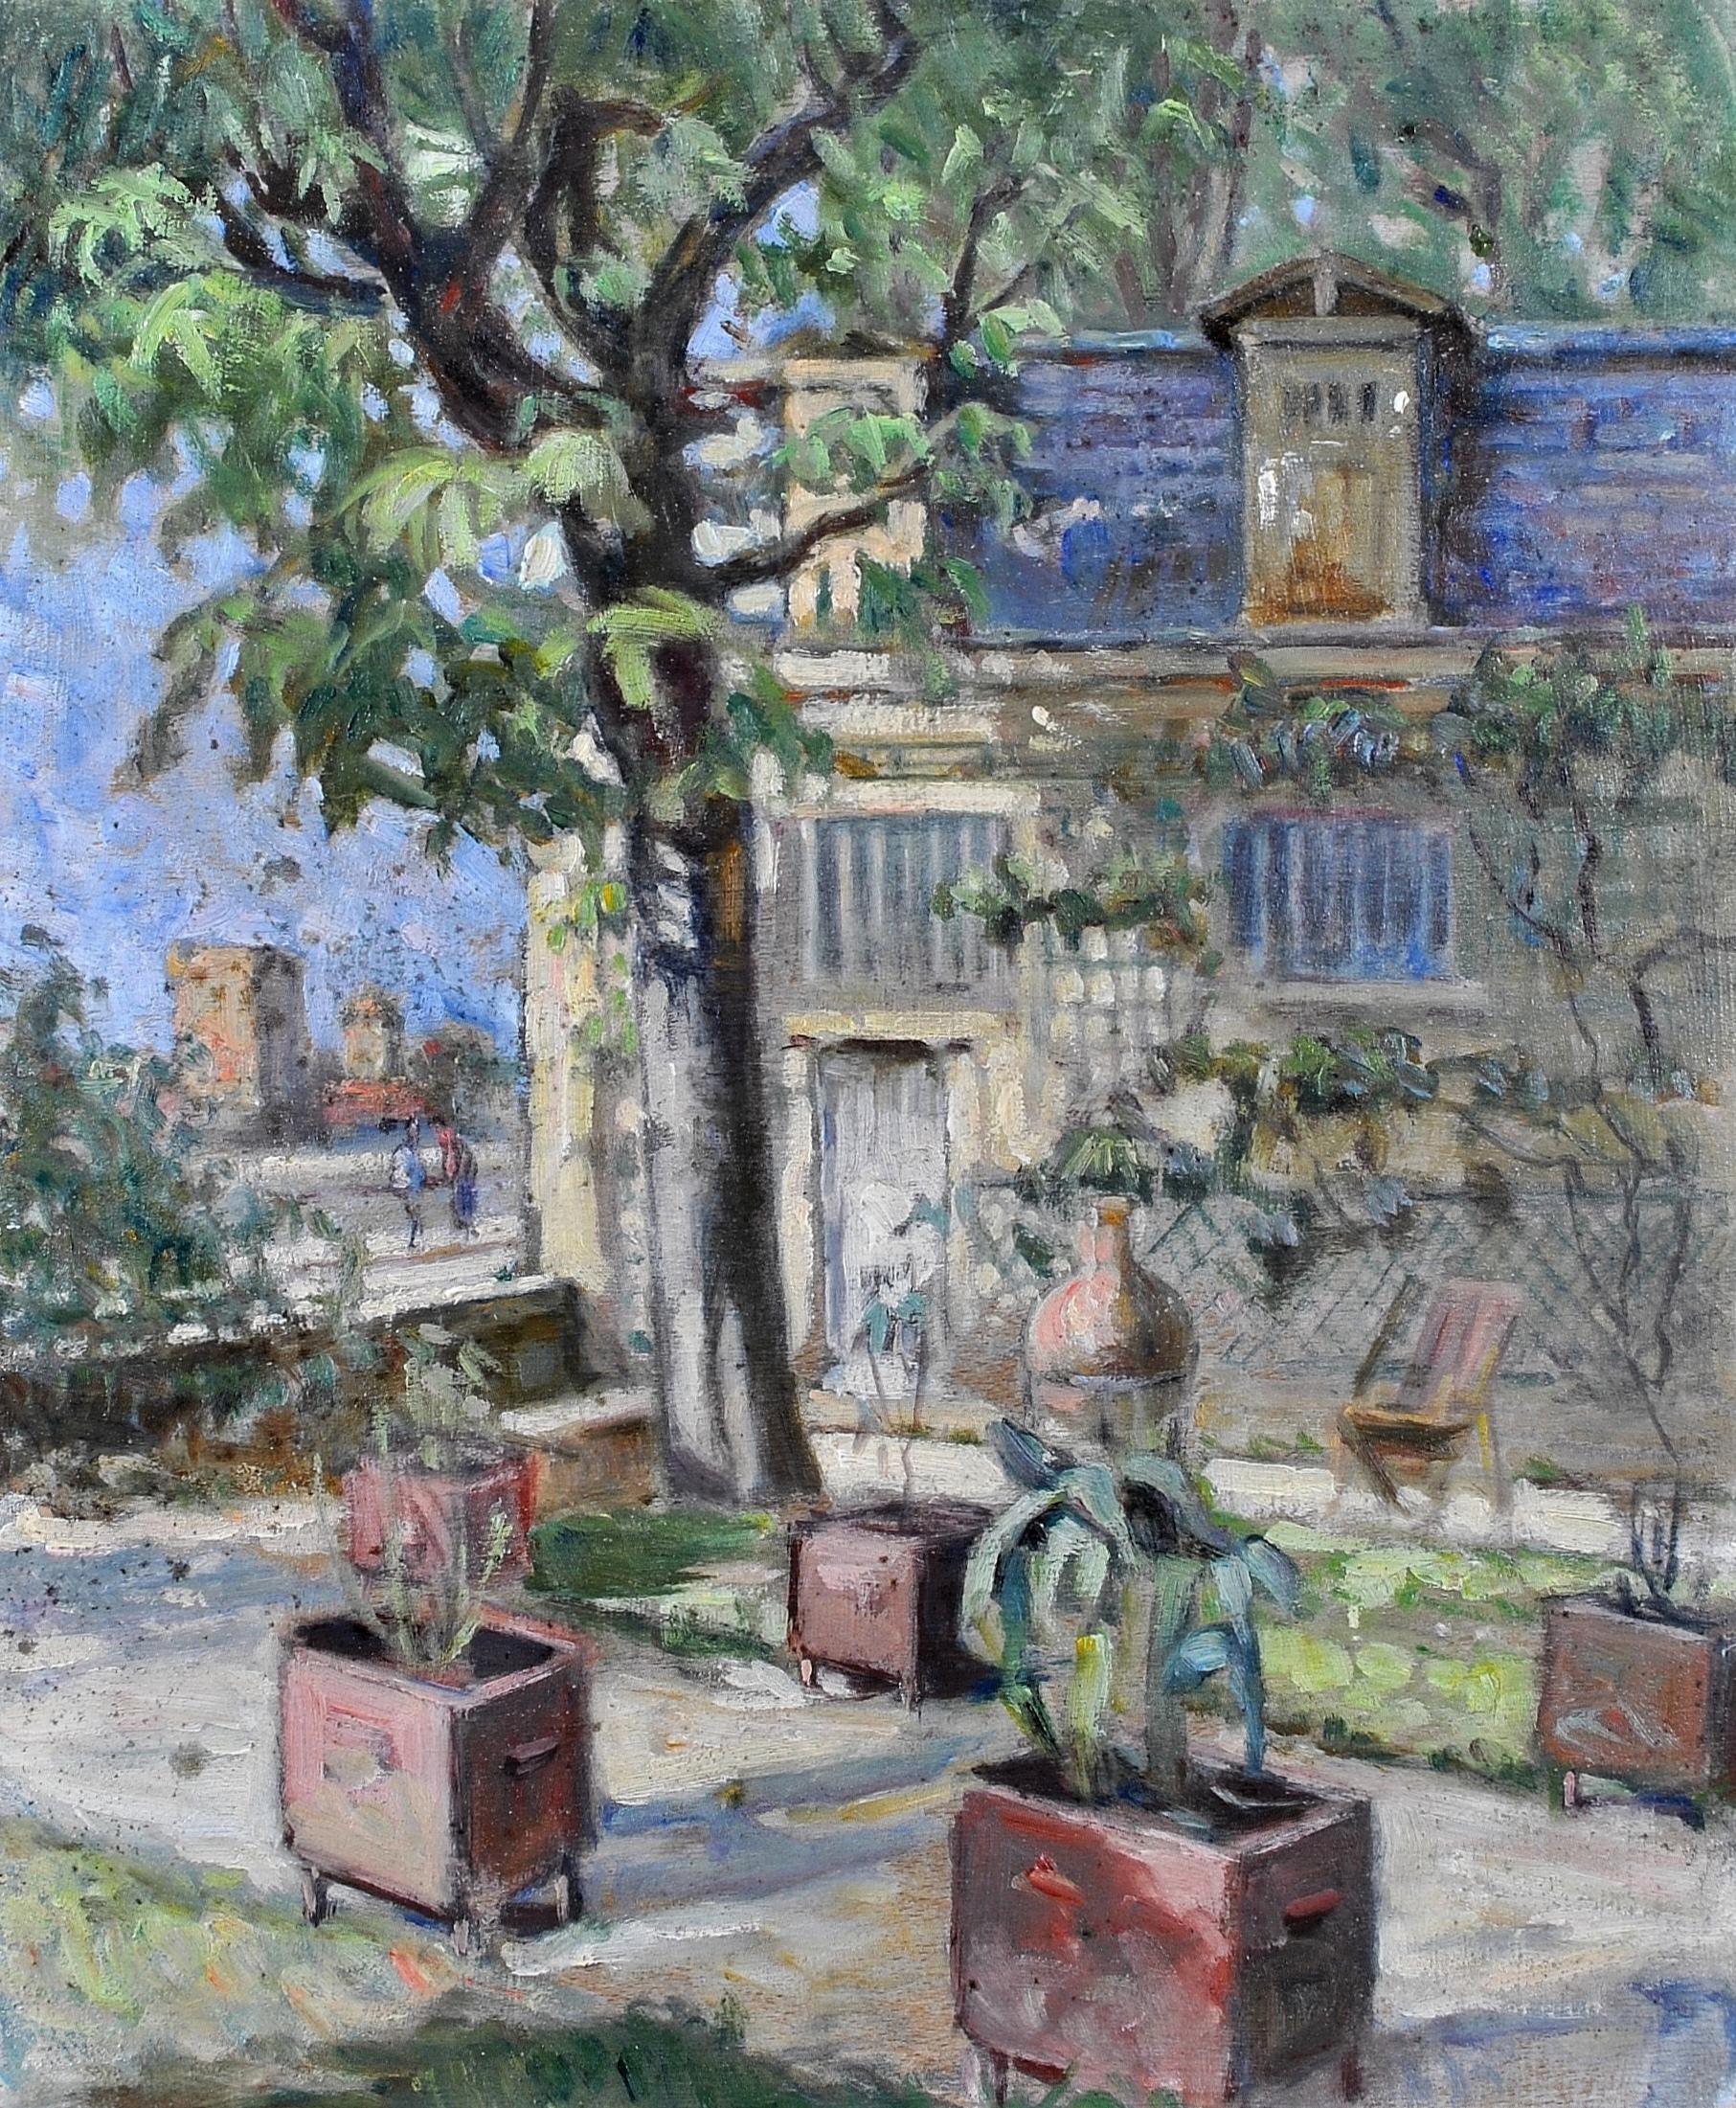 A beautiful c.1950 French impressionist oil on panel depicting the what is believed to be the artist's garden in Vienne, with the Tour Sainte Colombe in the background, by Jean Galland. The work is very atmospheric and well painted. Unframed - a